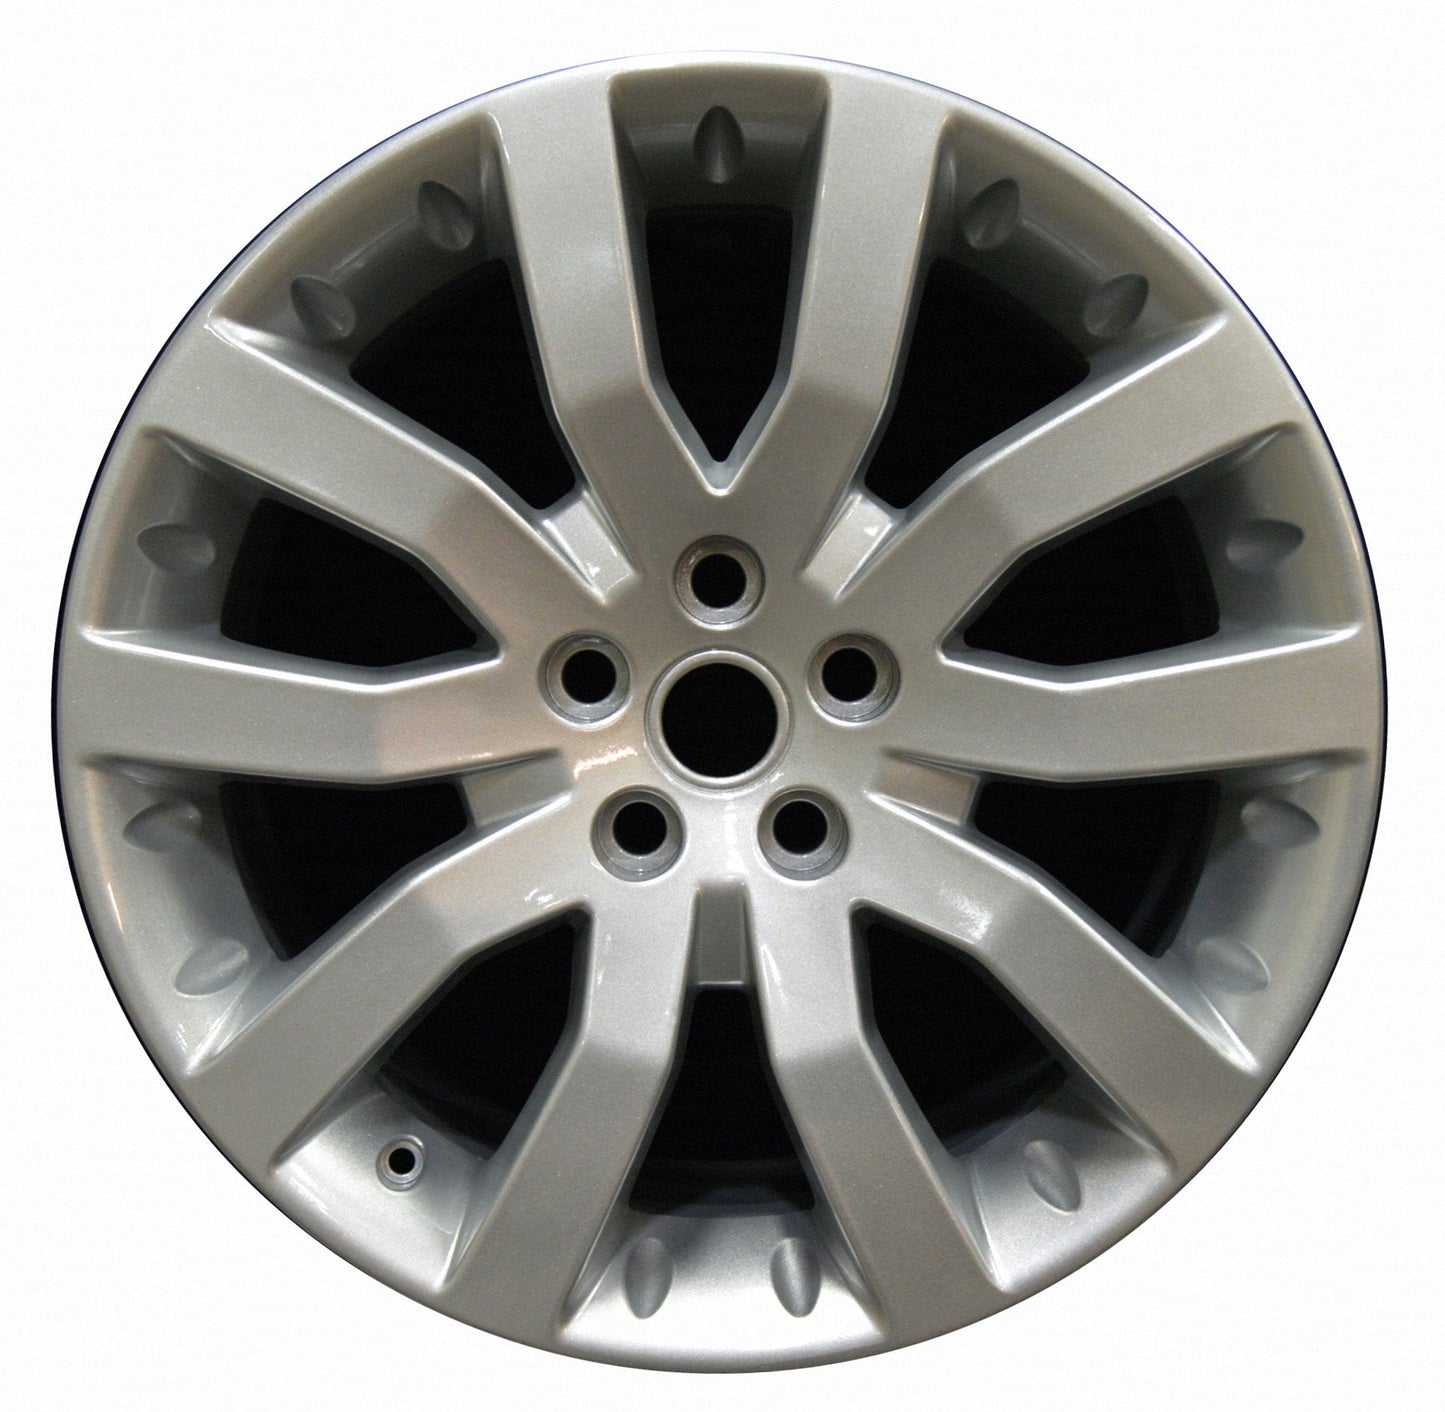 Land Rover Range Rover Sport  2006, 2007, 2008, 2009 Factory OEM Car Wheel Size 20x9.5 Alloy WAO.72196.PS08.FF